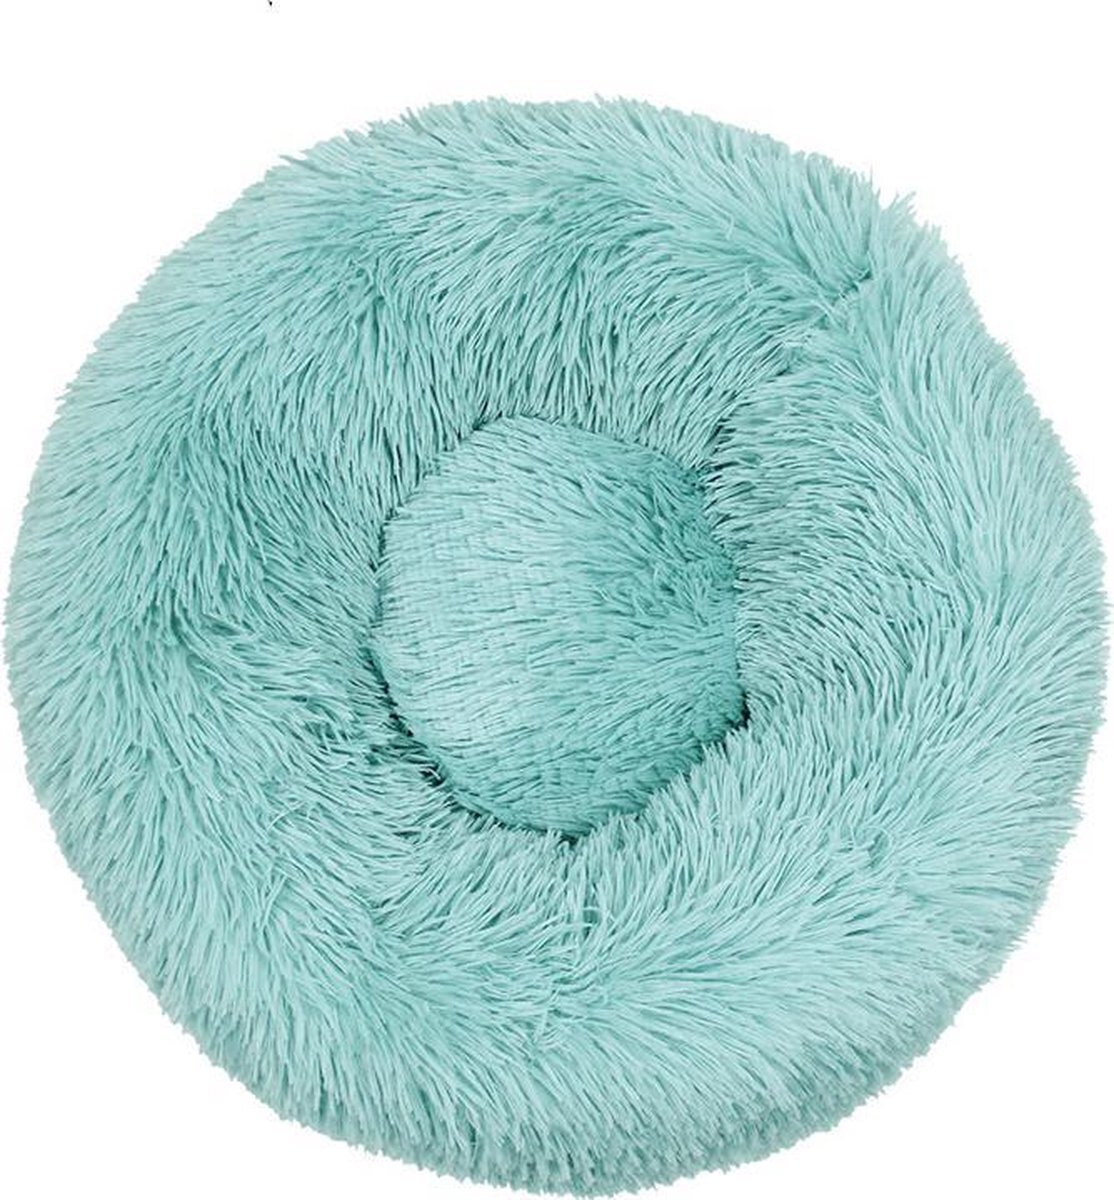 BEESSIES BEESSIES® donut hondenmand/kattenmand 50 cm - wasbare hoes - mint blauw - huisdierbed hond kat mand